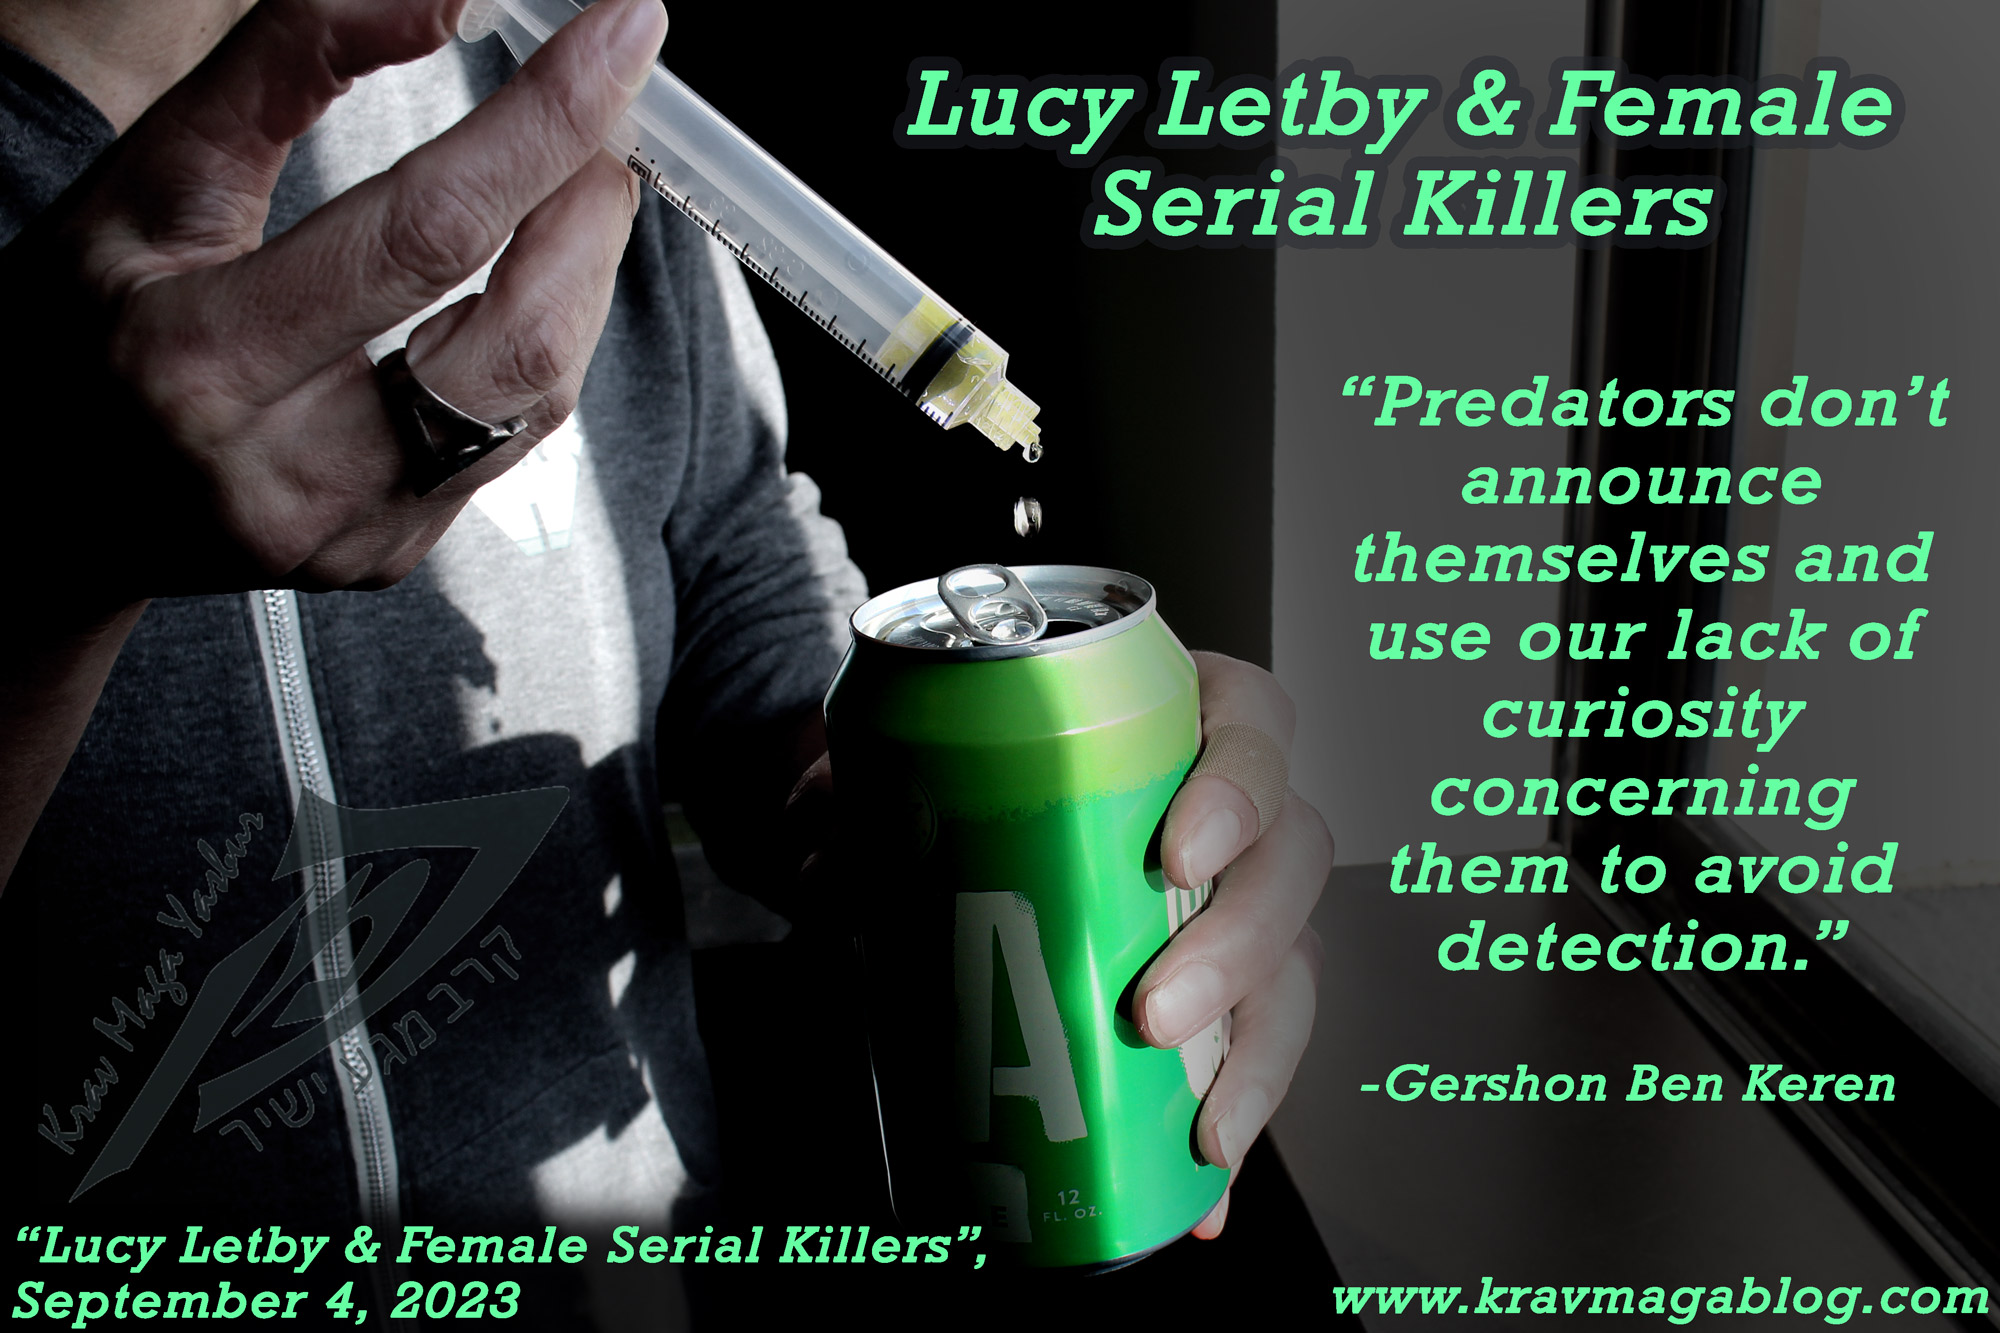 Lucy Letby & Female Serial Killers